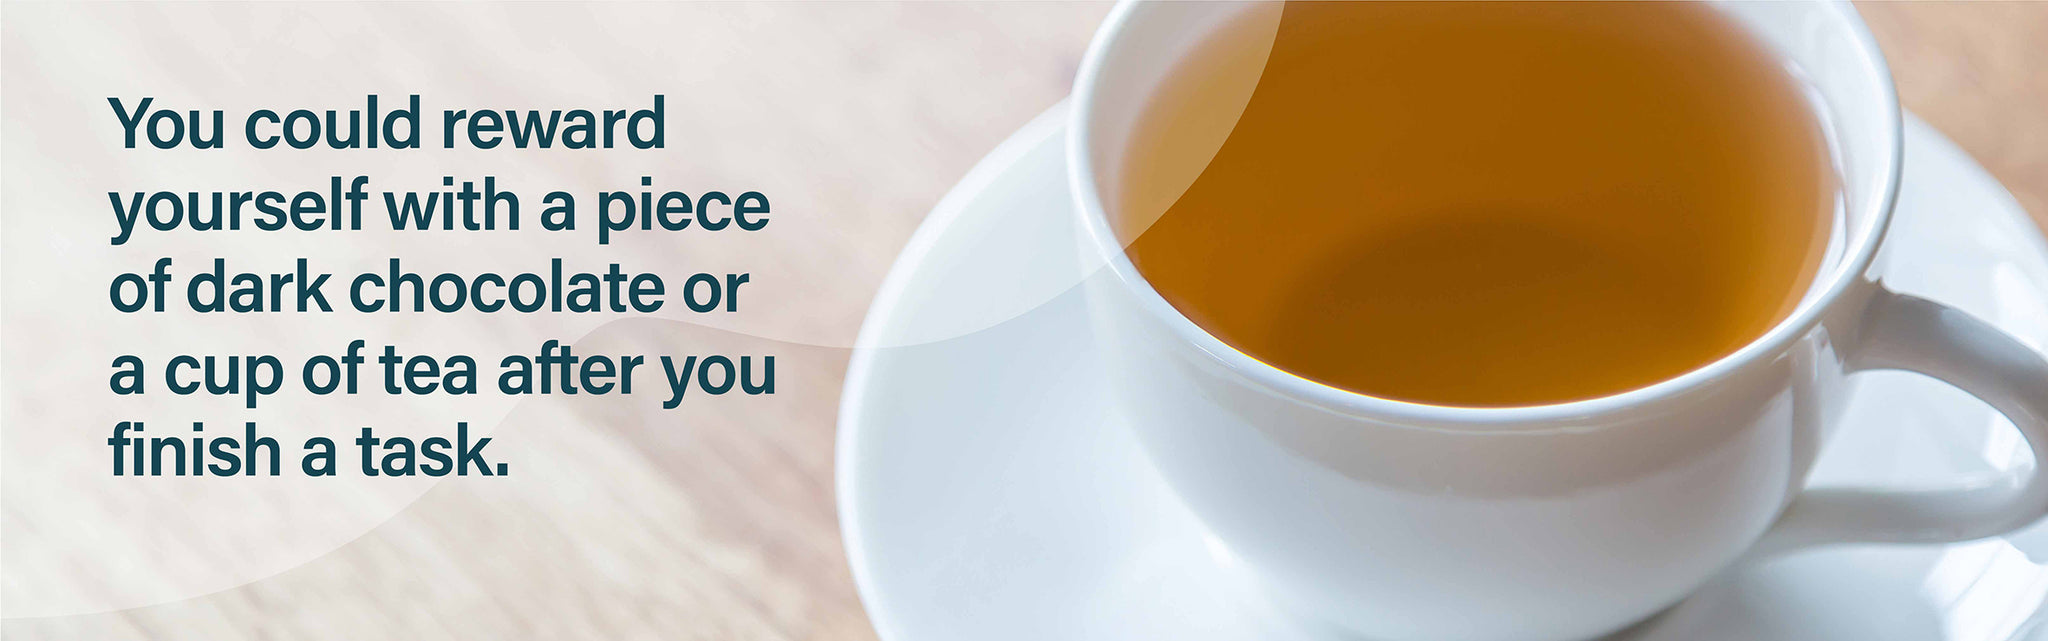 Reward yourself a cup of tea after you finish a task